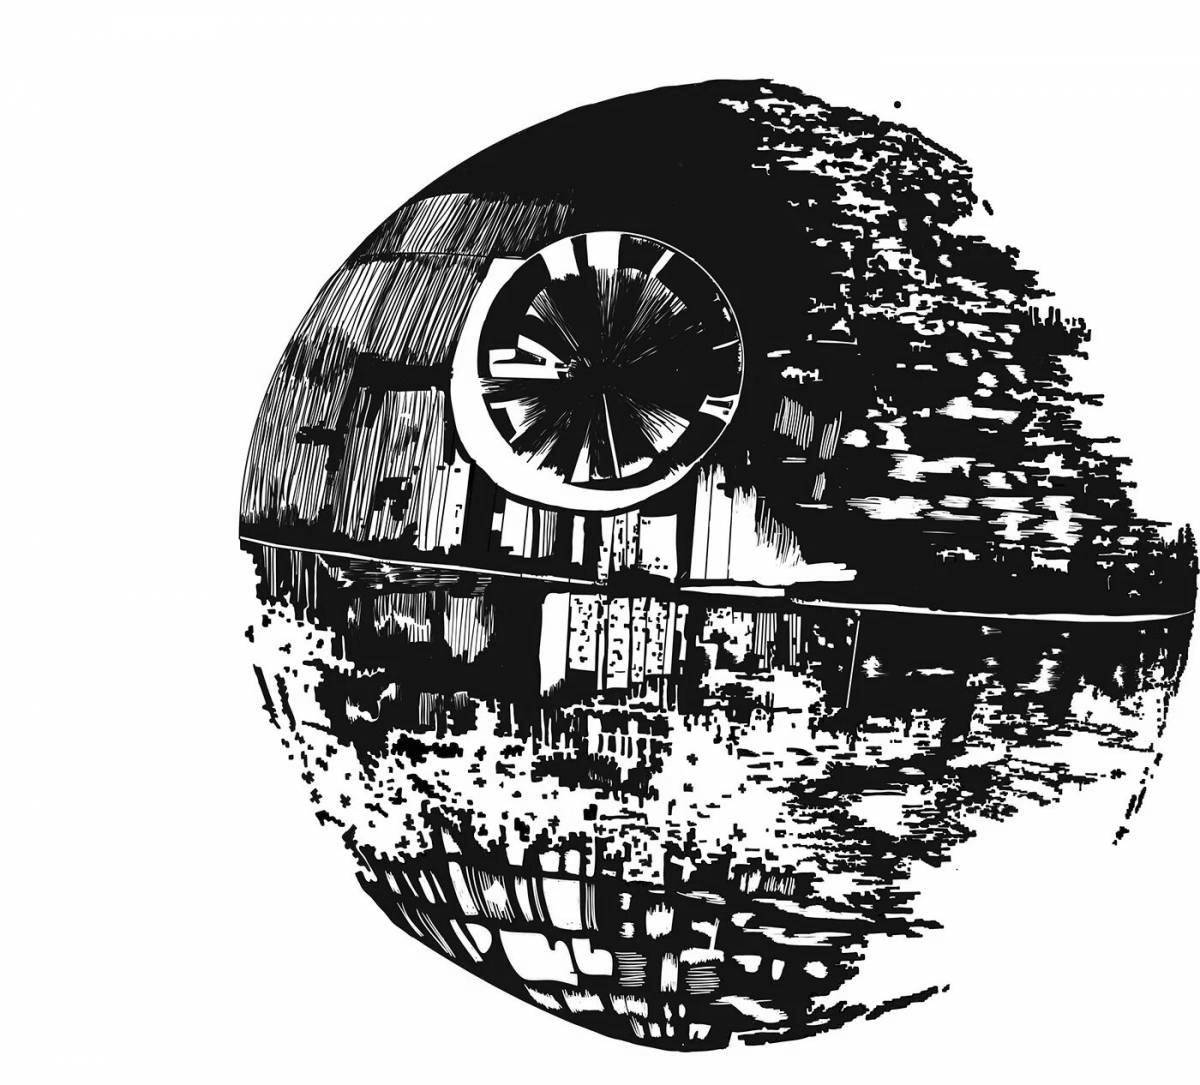 Fabulous death star coloring book